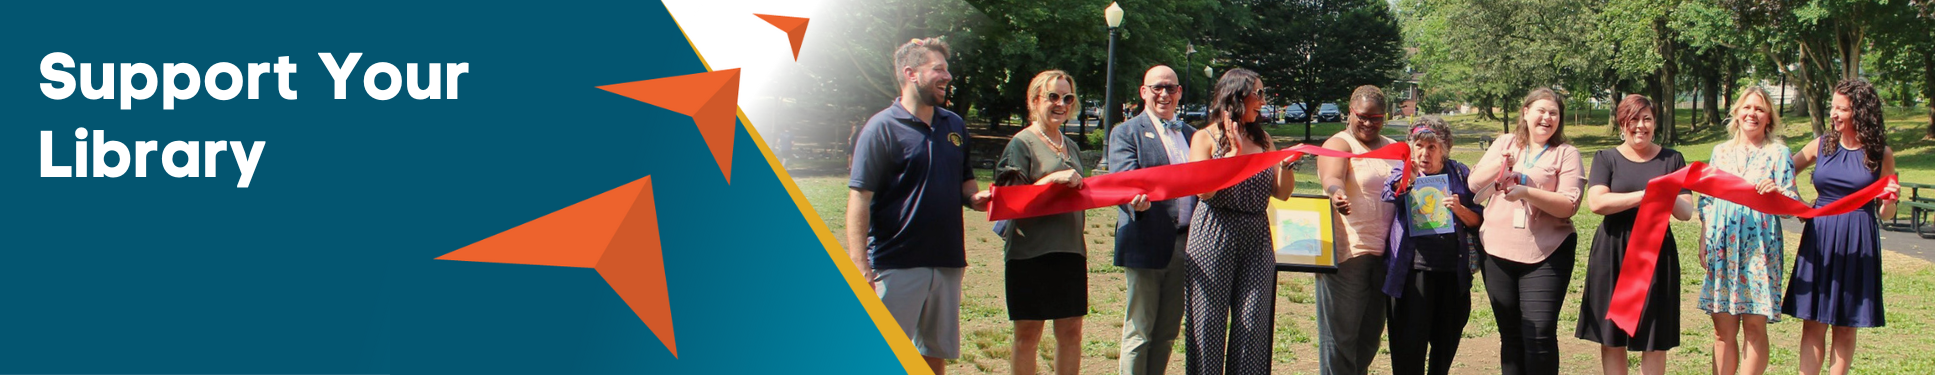 Support your Library banner with three orange arrows pointing to group of people holding red cut ribbon.